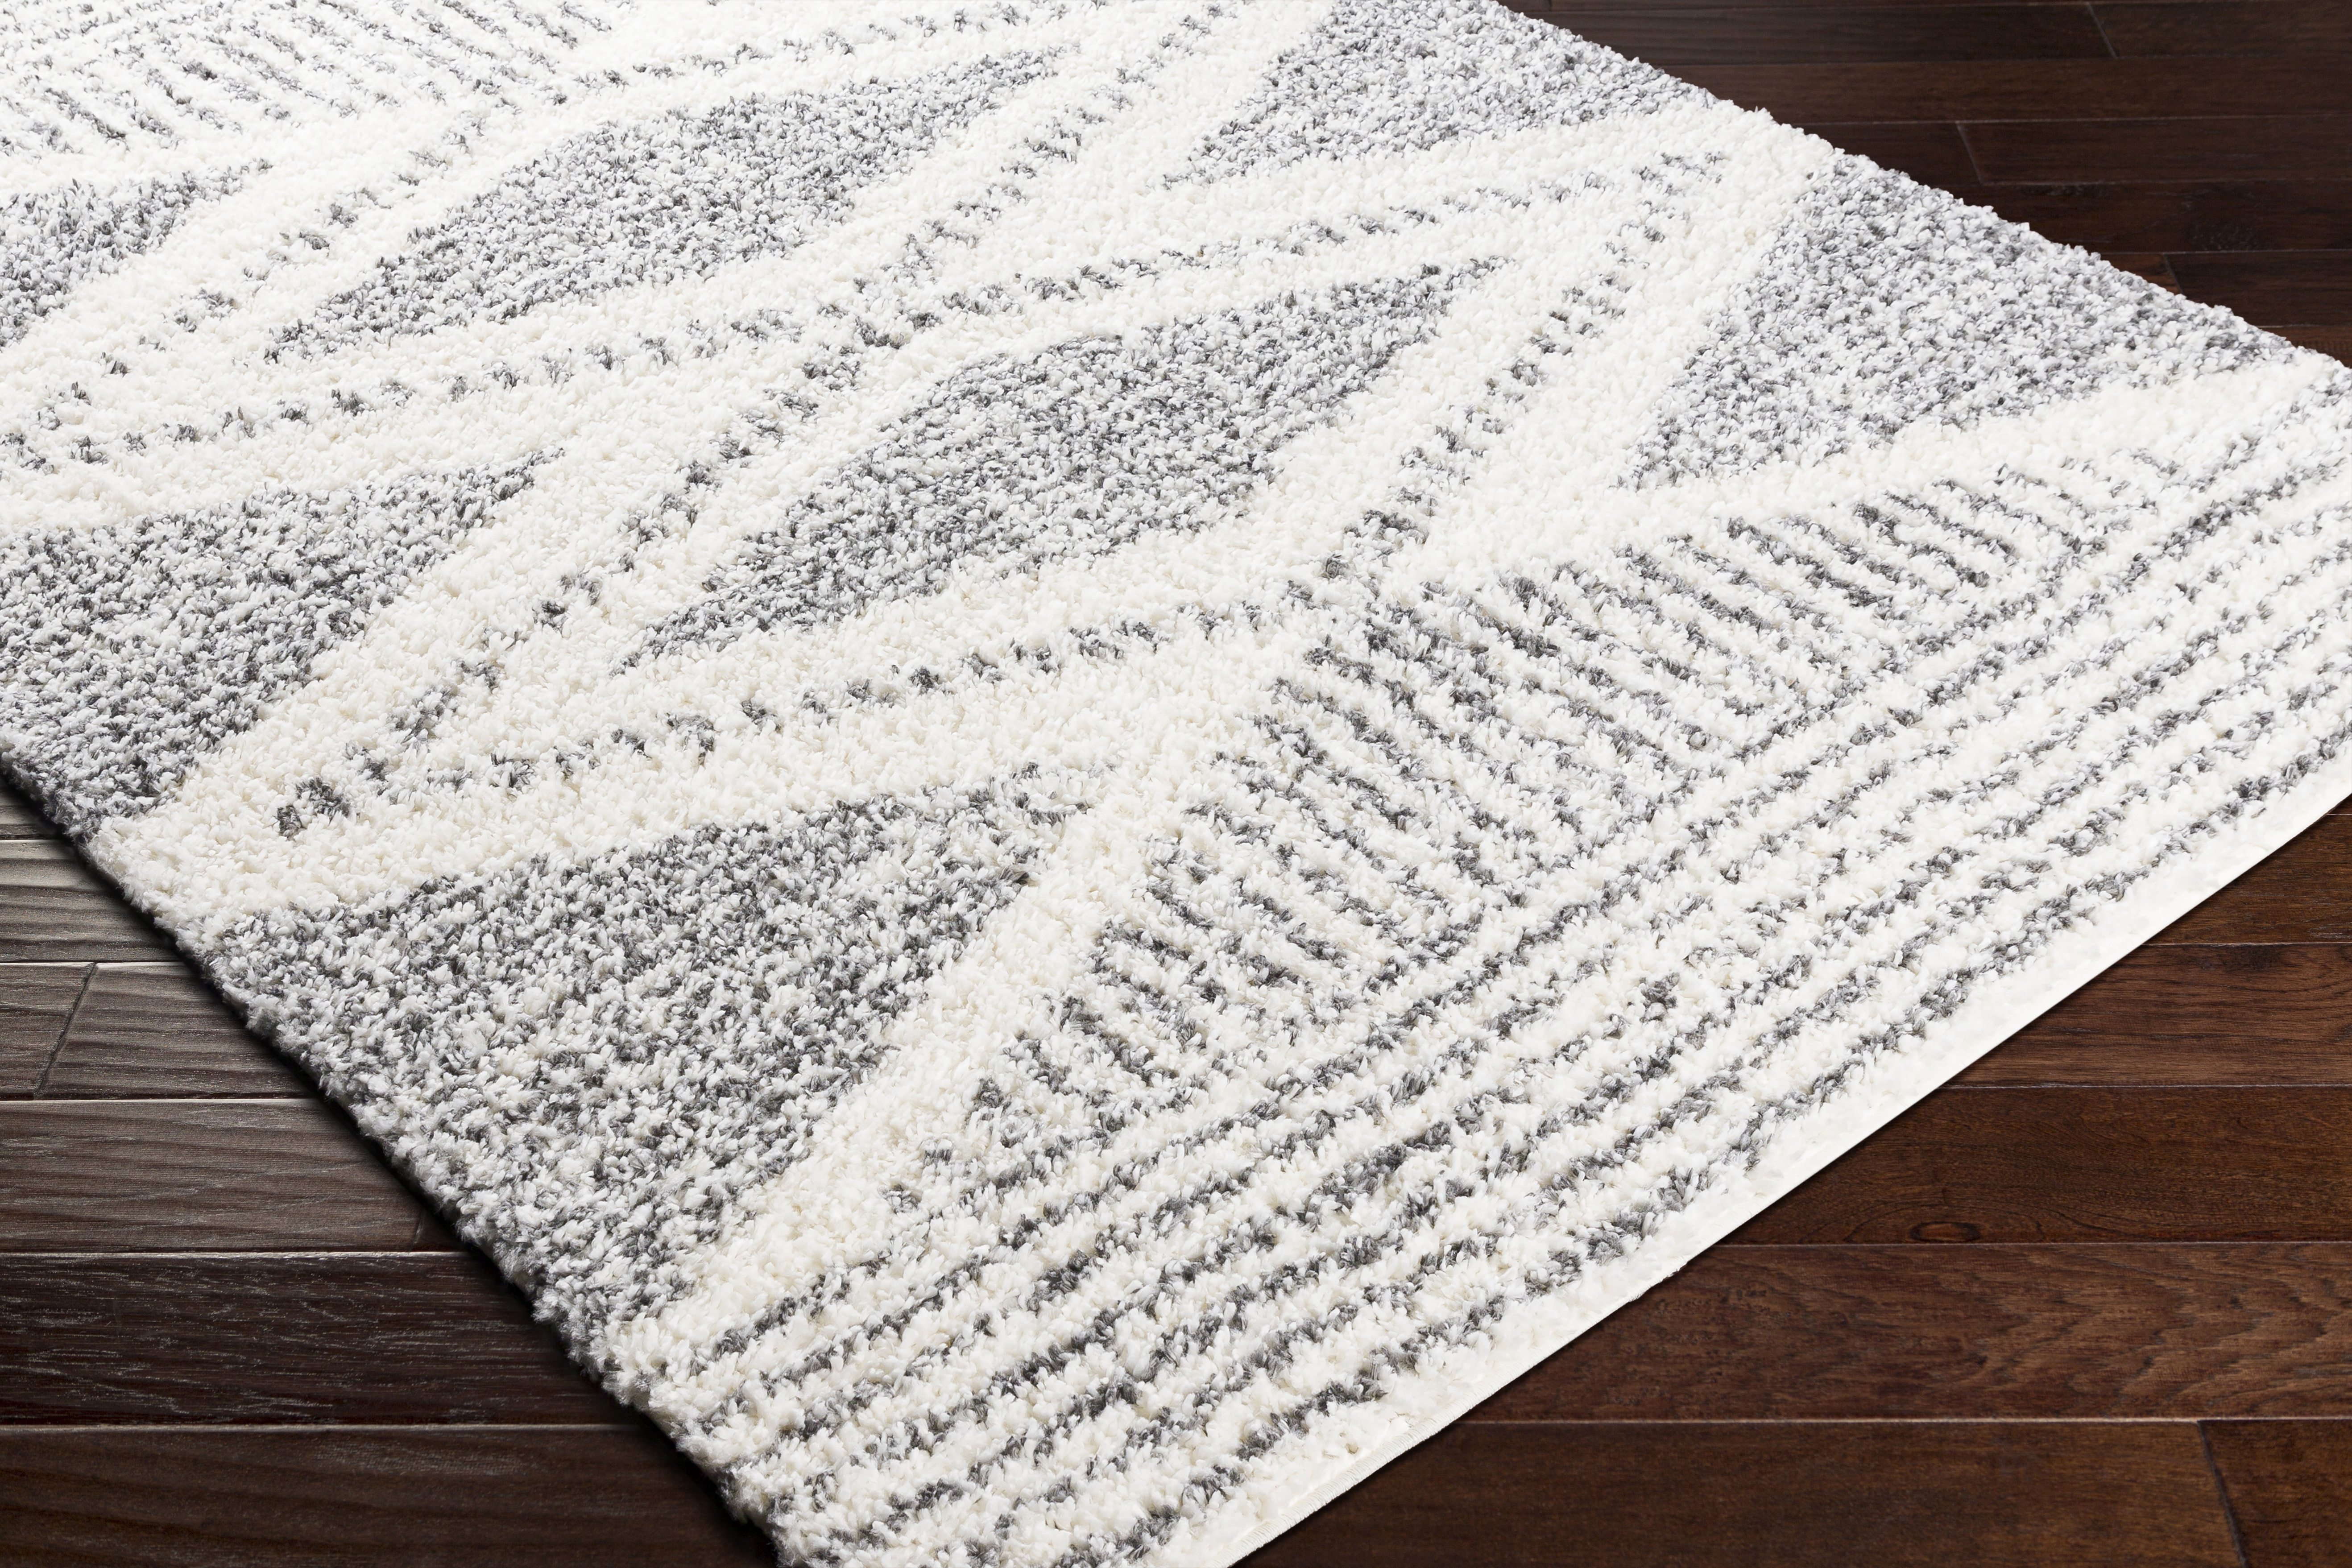 Deluxe Shag Rug, 7'10" x 10'3" - Image 6